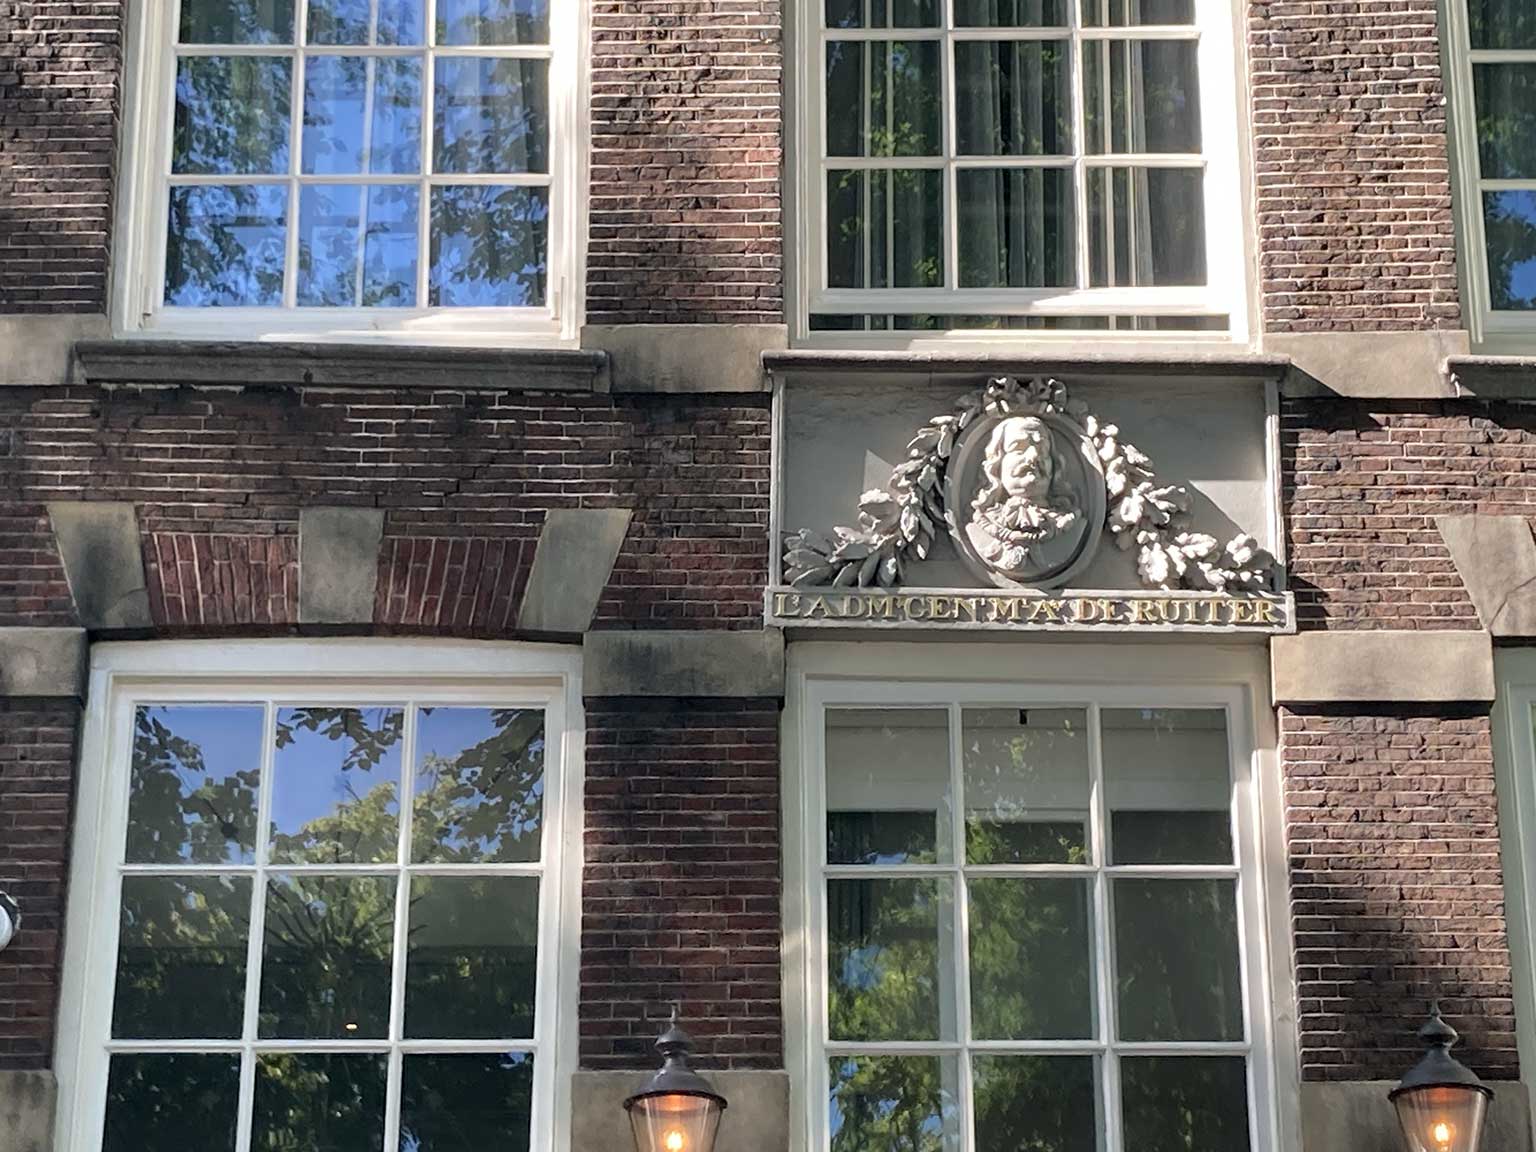 Plaque on the front of Admiral De Ruyter's house, Prins Hendrikkade 131, Amsterdam